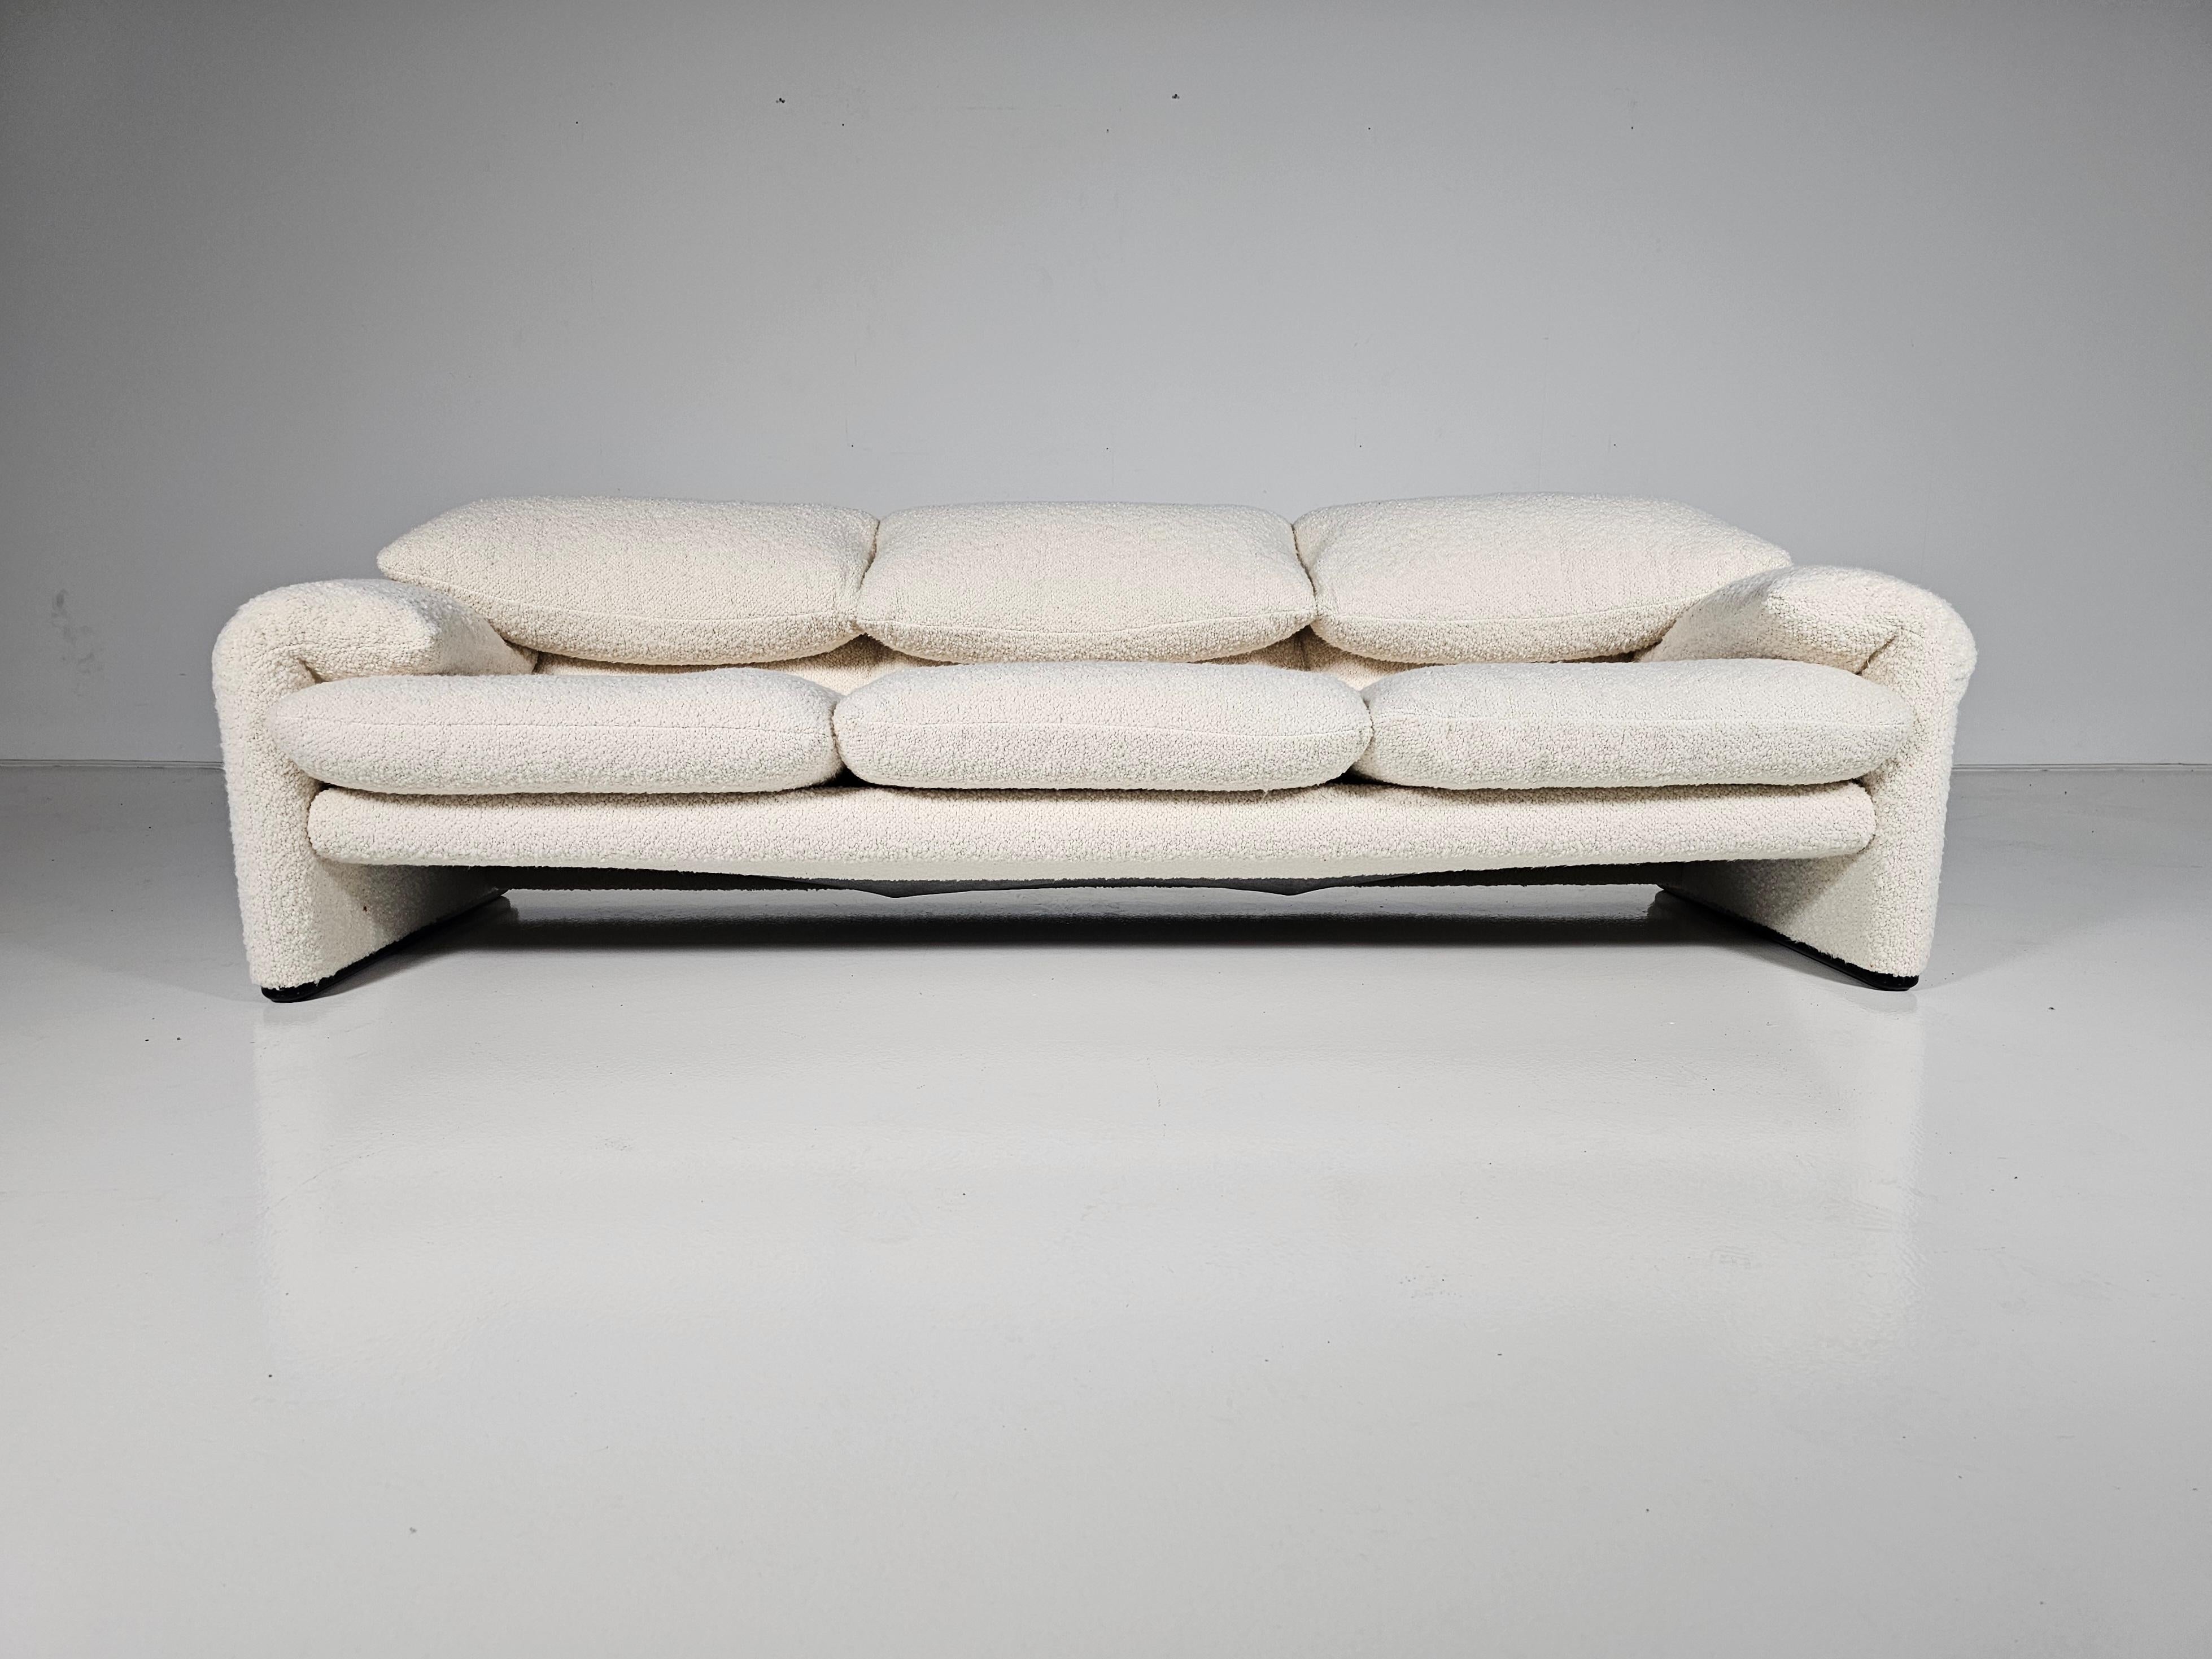 This Maralunga sofa was designed by Vico Magistretti for Cassina in 1973. This is an original version of the seventies. Reupholstered in a cream fluffy bouclé. With steel structure. The backrest can be raised or lowered for total comfort. It won the